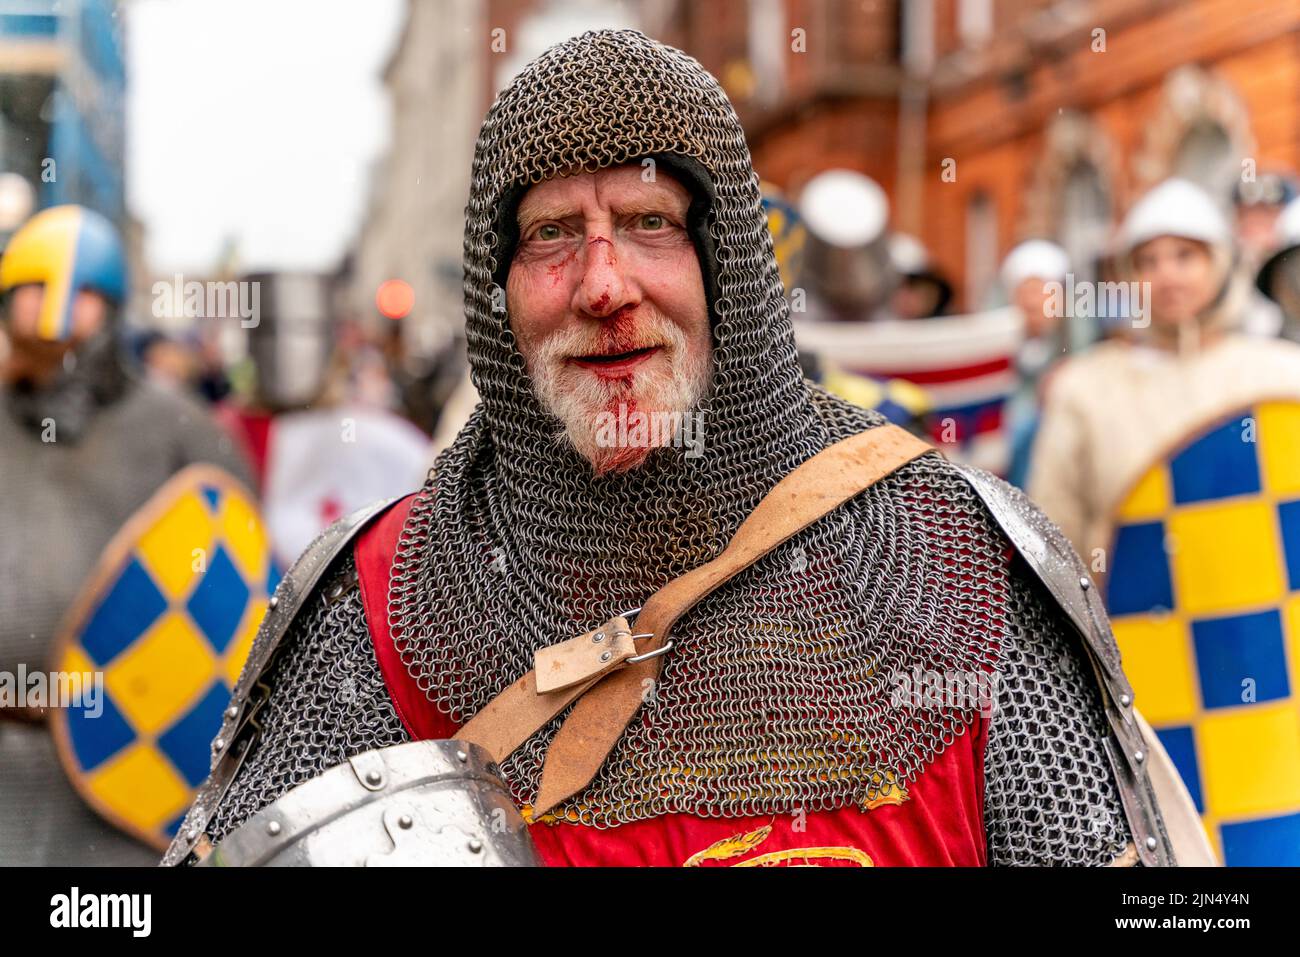 A Senior Man Sustains An Injury During The Battle Of Lewes Re-Enactment Event, Lewes, East Sussex, UK Stock Photo